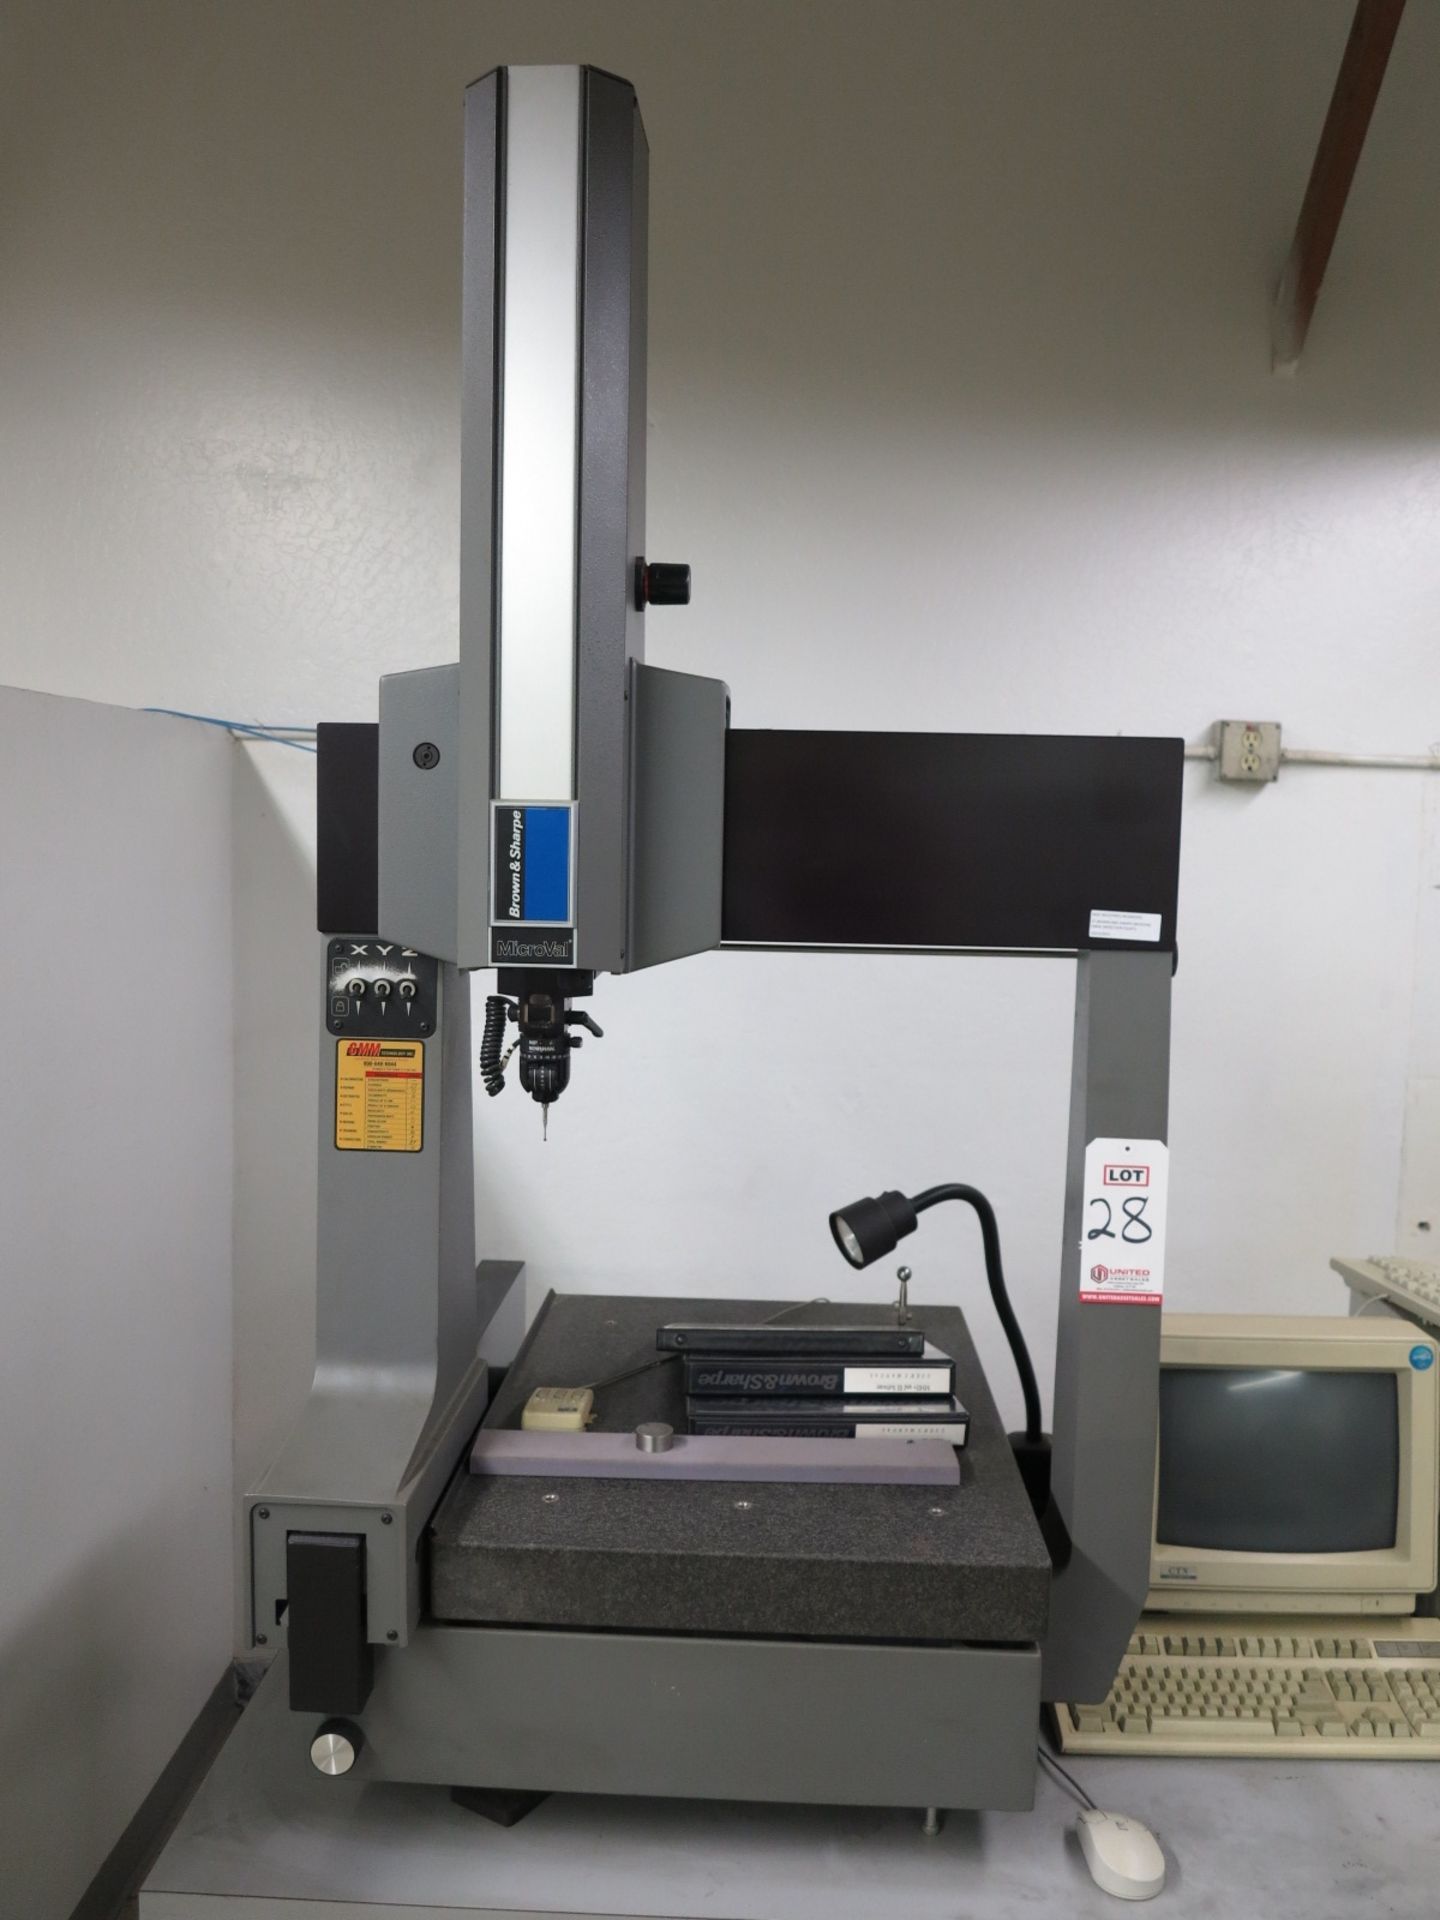 BROWN & SHARPE MICRO VAL CMM, BENCH TOP, AIR DRYER, TOUCH PROBE, COMPUTER, SOFTWARE